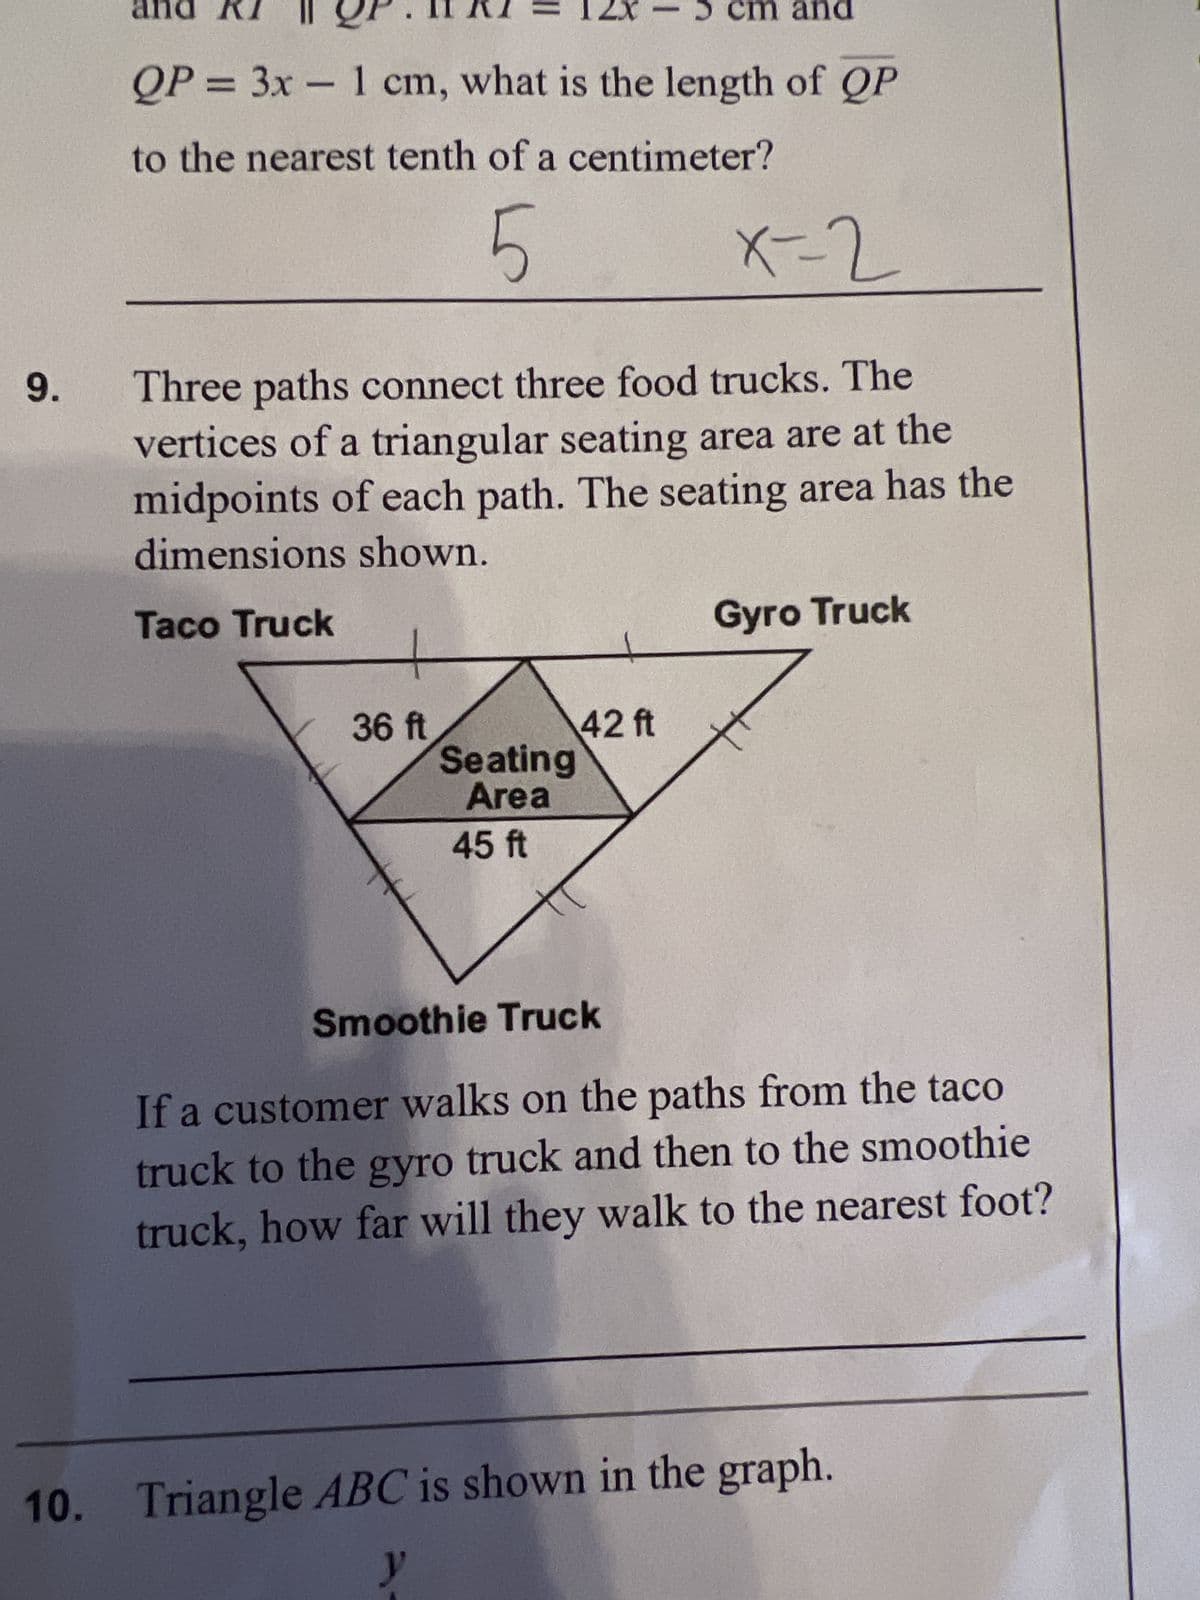 9.
and
QP = 3x - 1 cm, what is the length of QP
to the nearest tenth of a centimeter?
5
X-2
Three paths connect three food trucks. The
vertices of a triangular seating area are at the
midpoints of each path. The seating area has the
dimensions shown.
Taco Truck
+
36 ft
cm and
Seating
Area
45 ft
42 ft
Gyro Truck
Smoothie Truck
If a customer walks on the paths from the taco
truck to the gyro truck and then to the smoothie
truck, how far will they walk to the nearest foot?
10. Triangle ABC is shown in the graph.
y